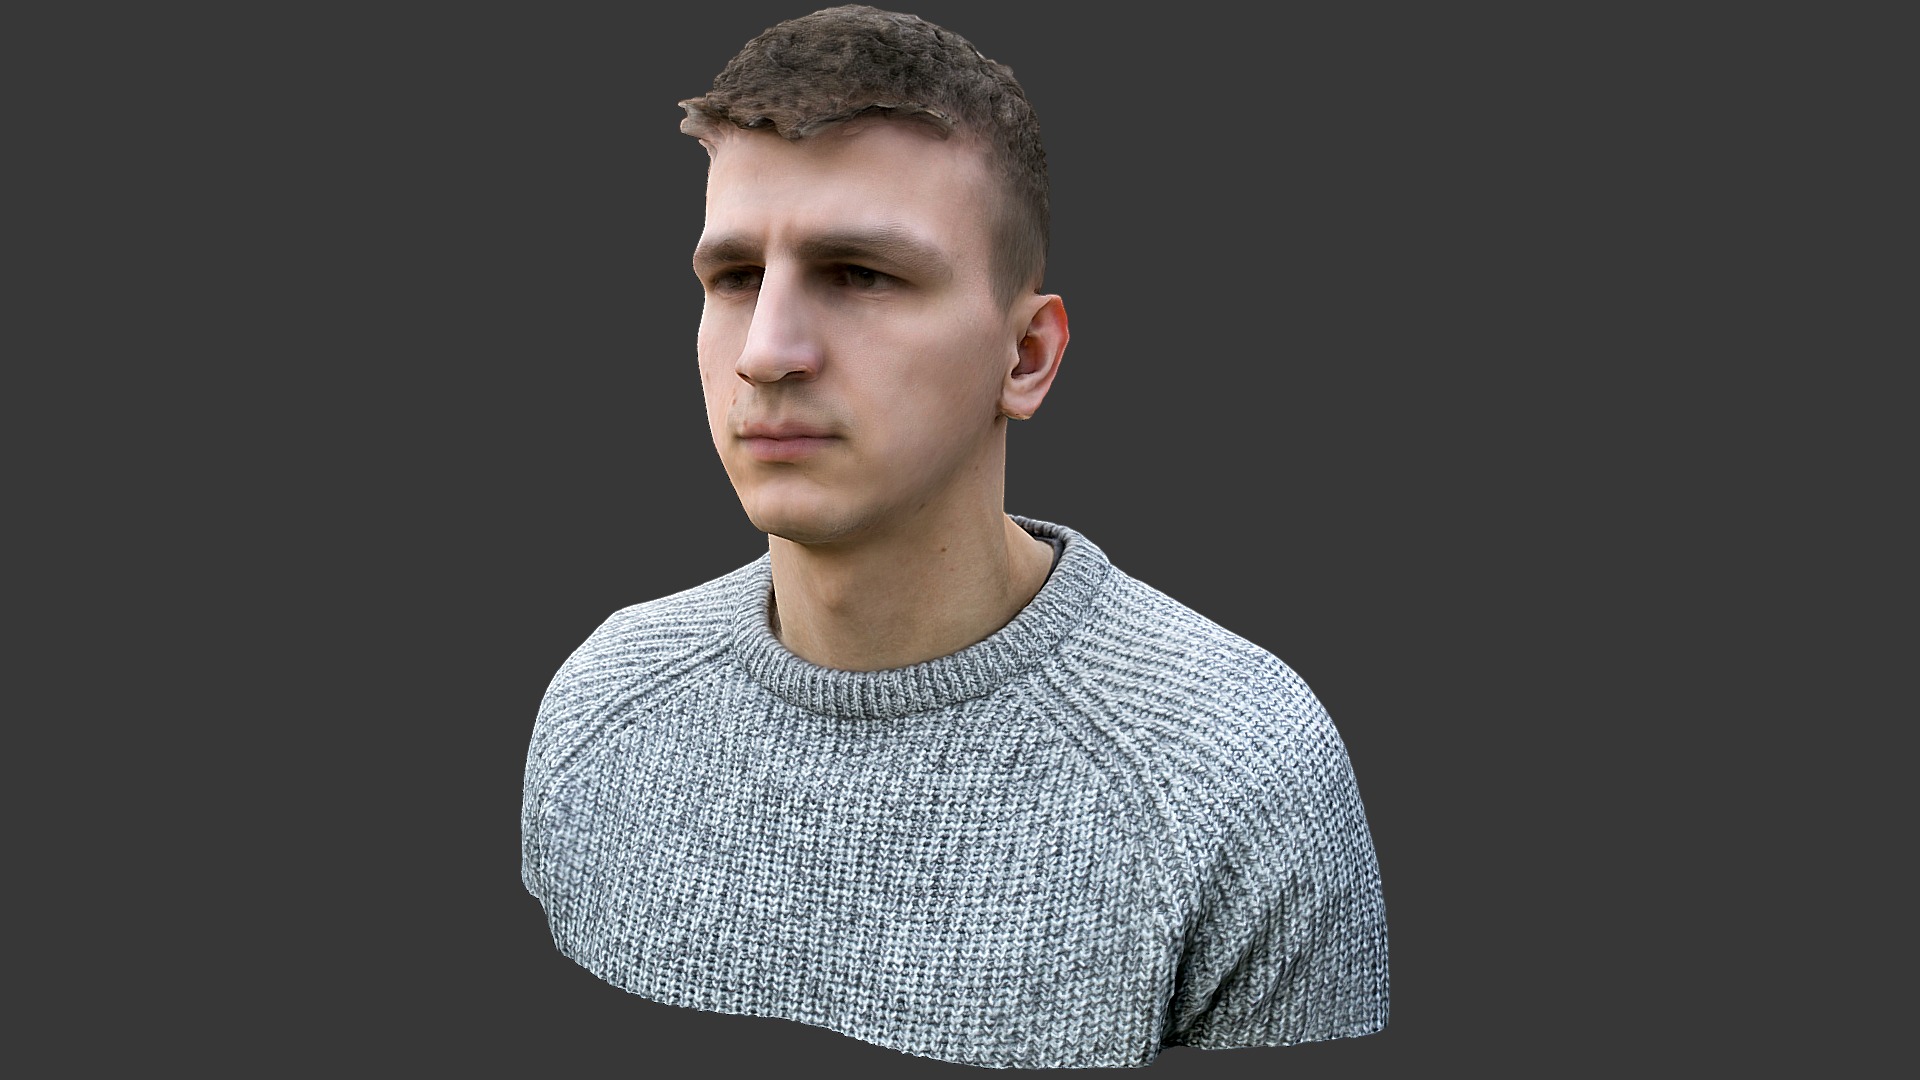 3D model Sergey - This is a 3D model of the Sergey. The 3D model is about a person in a grey shirt.